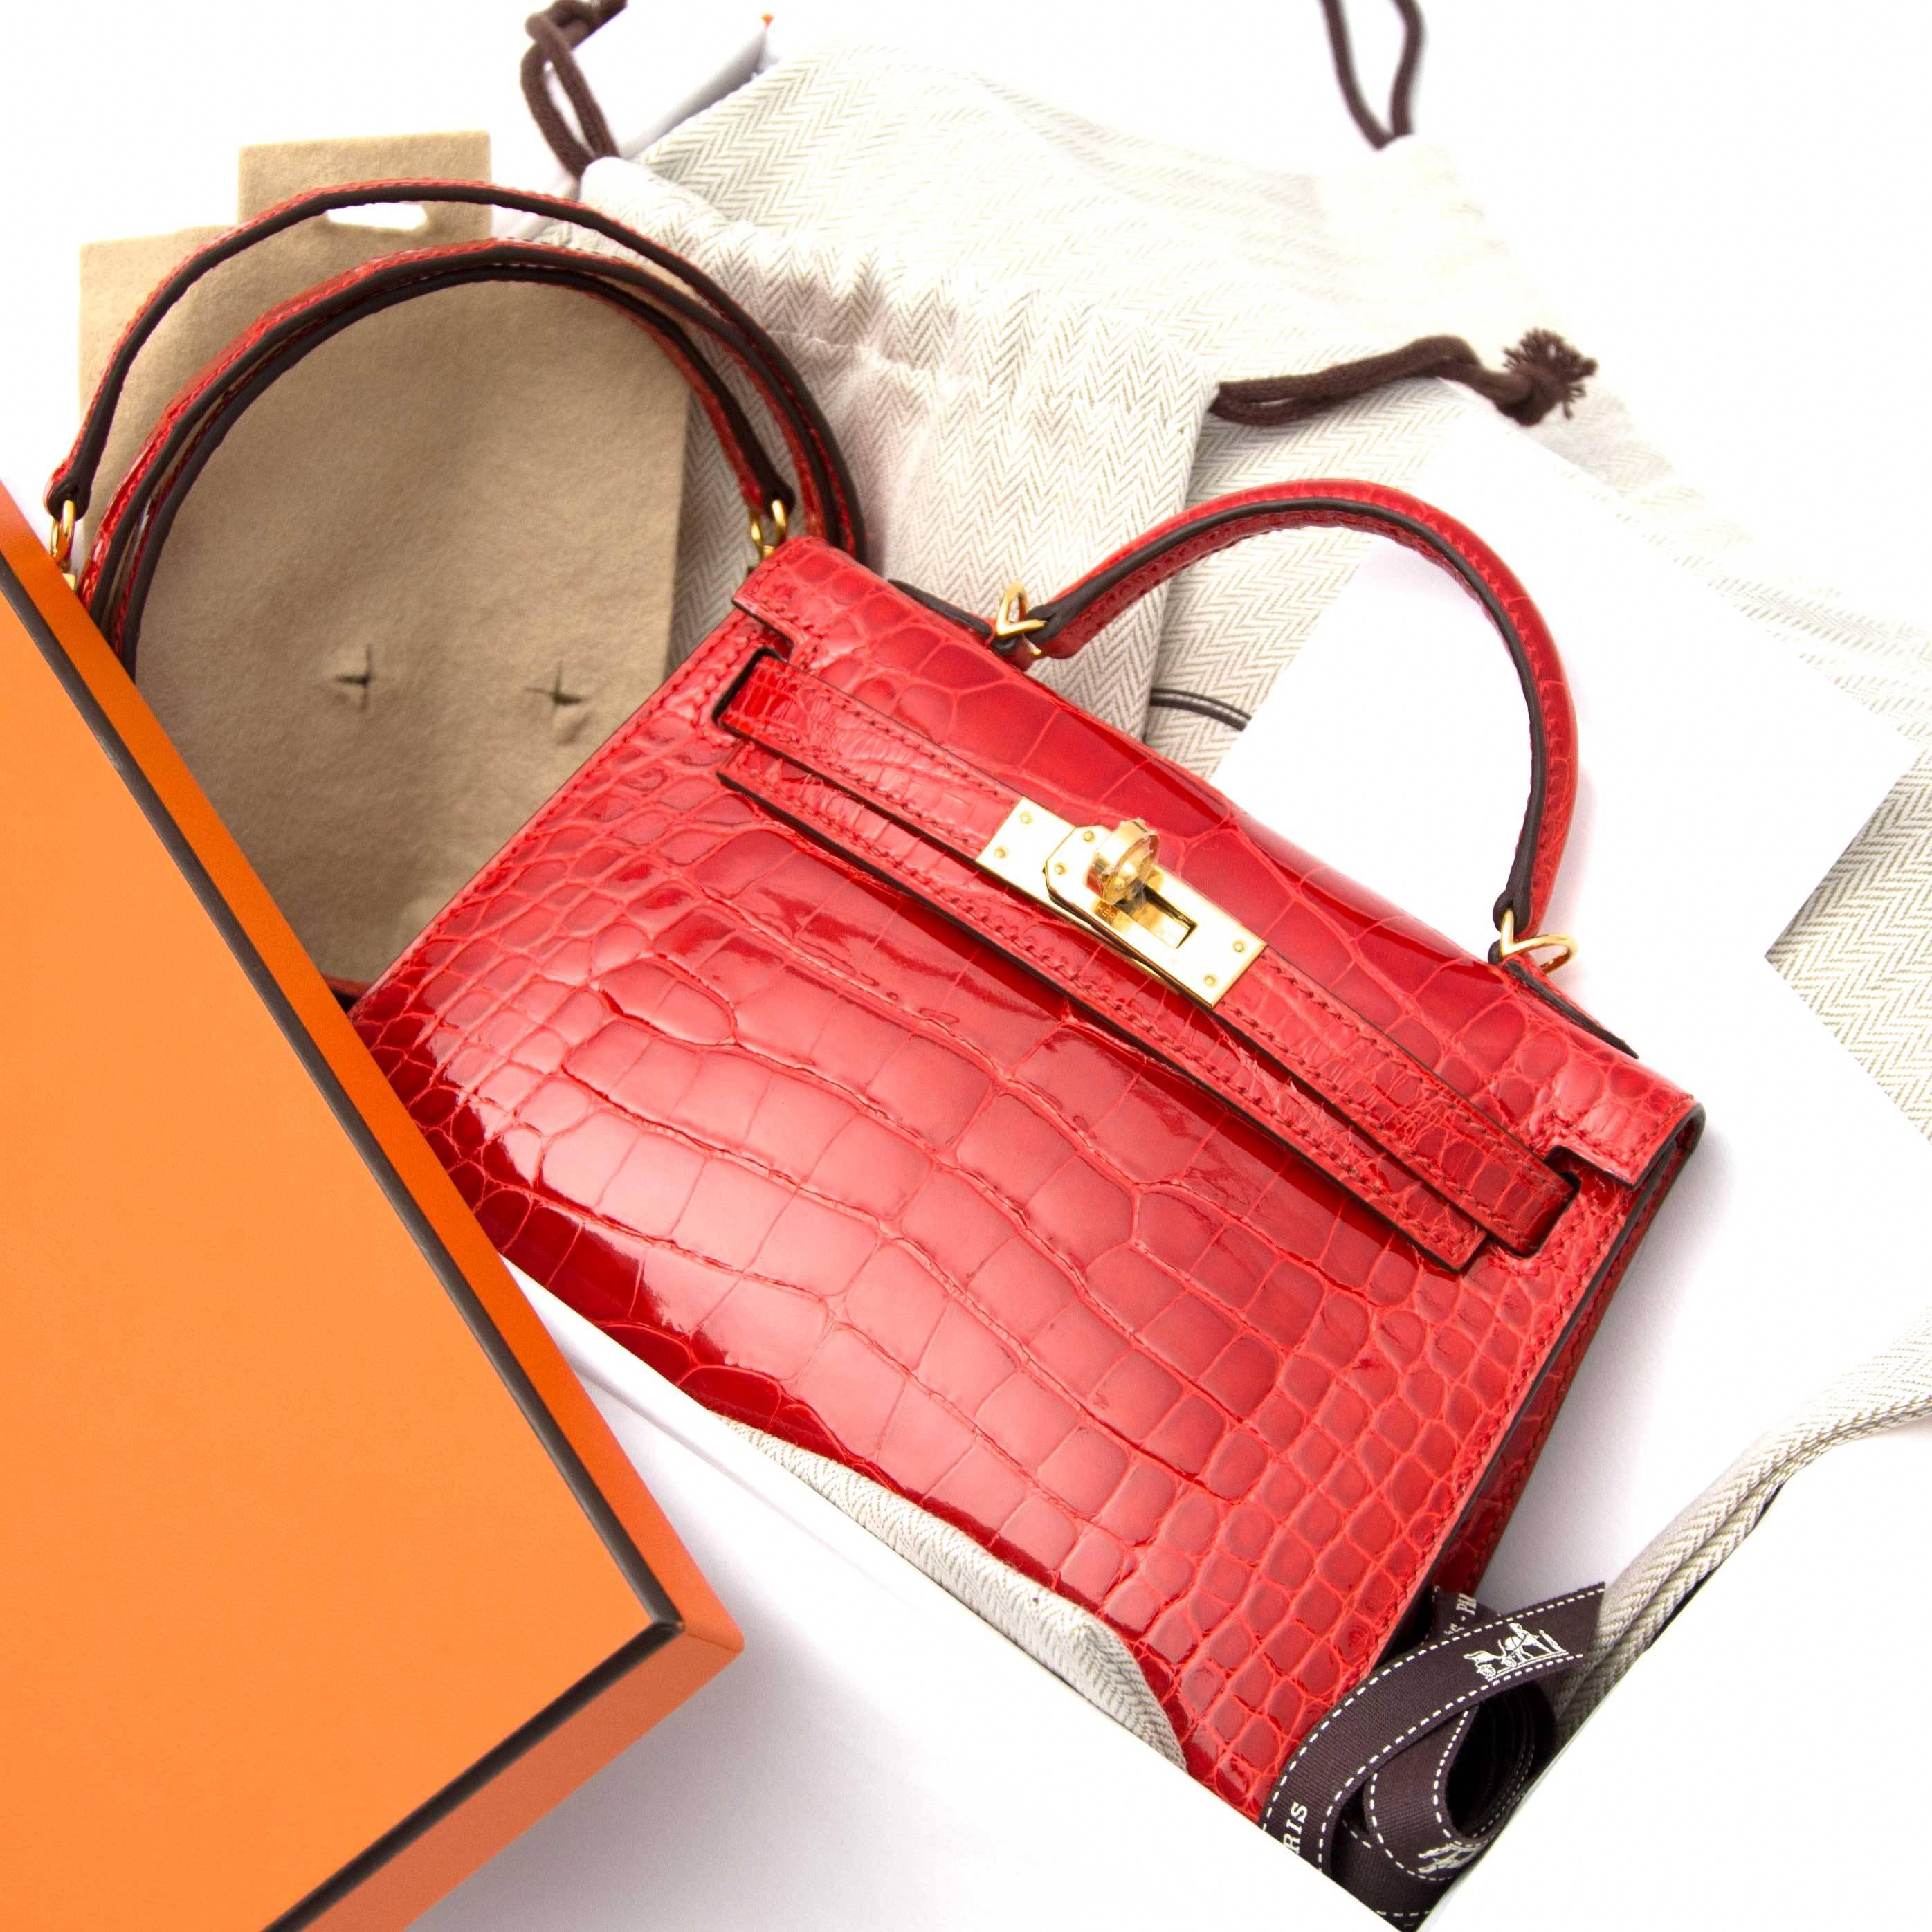 This exquisite hard to find Hermès Kelly Mini Pochette comes in a shiny alligator leather in Vibrant red toned "geranium" color. The alligator mississippiensis skin is identified by the embossed square signature.The Hermes Kelly Pochette